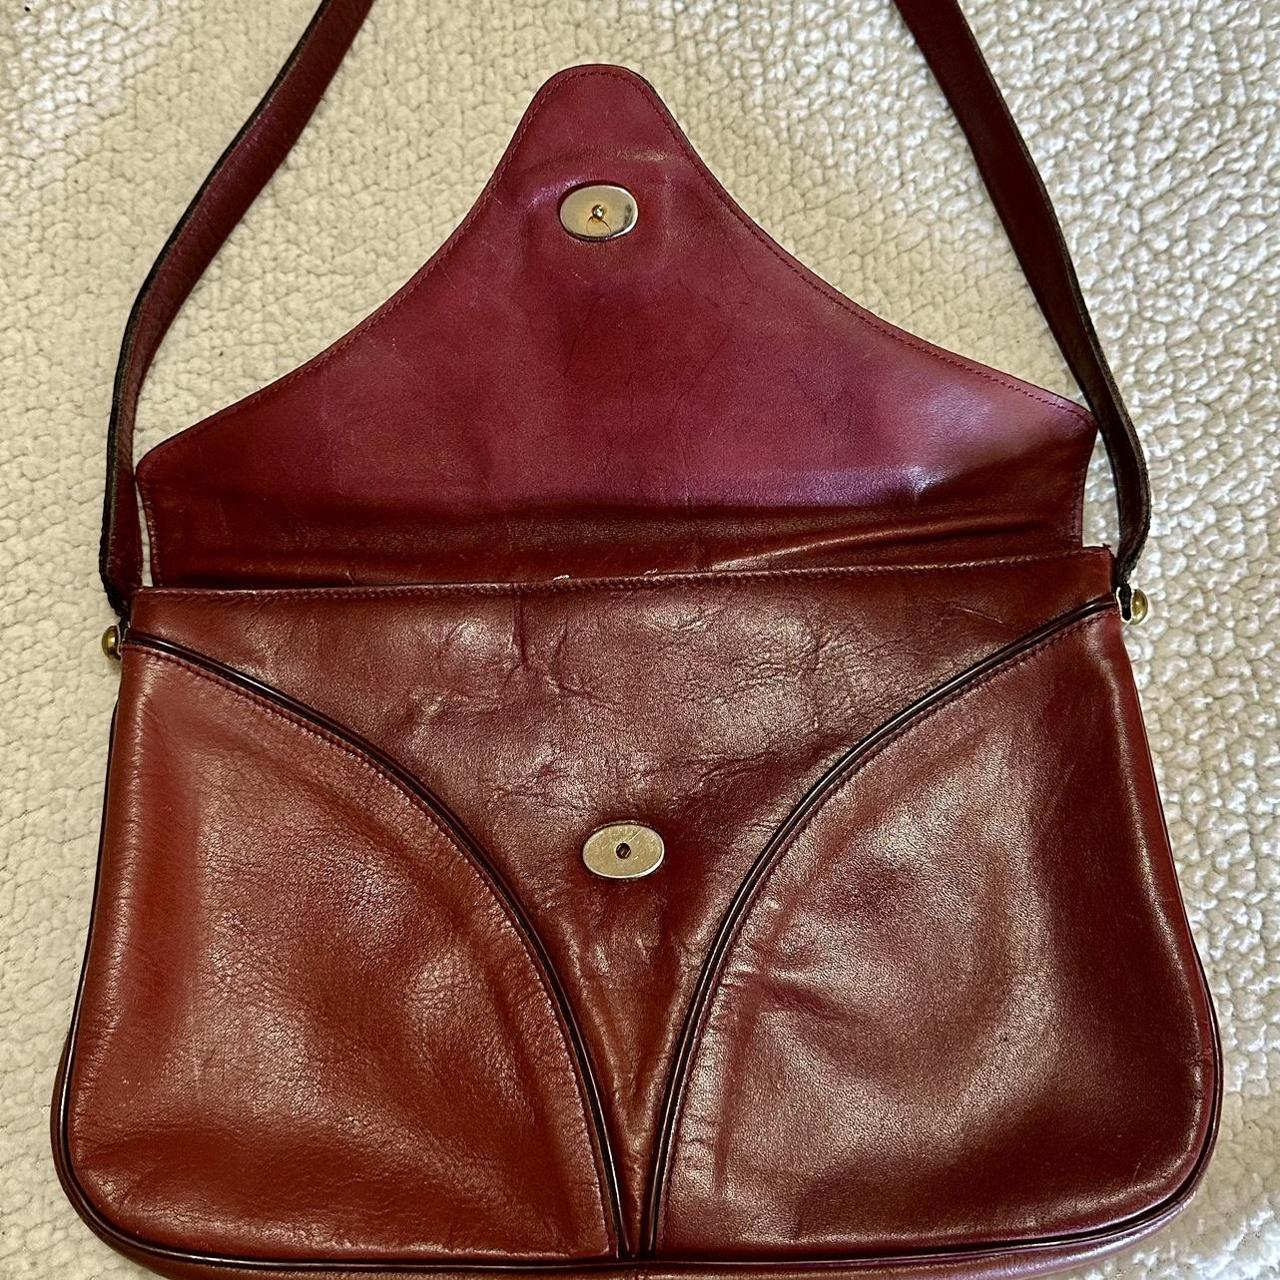 Aigner Women's Brown and Burgundy Bag (2)